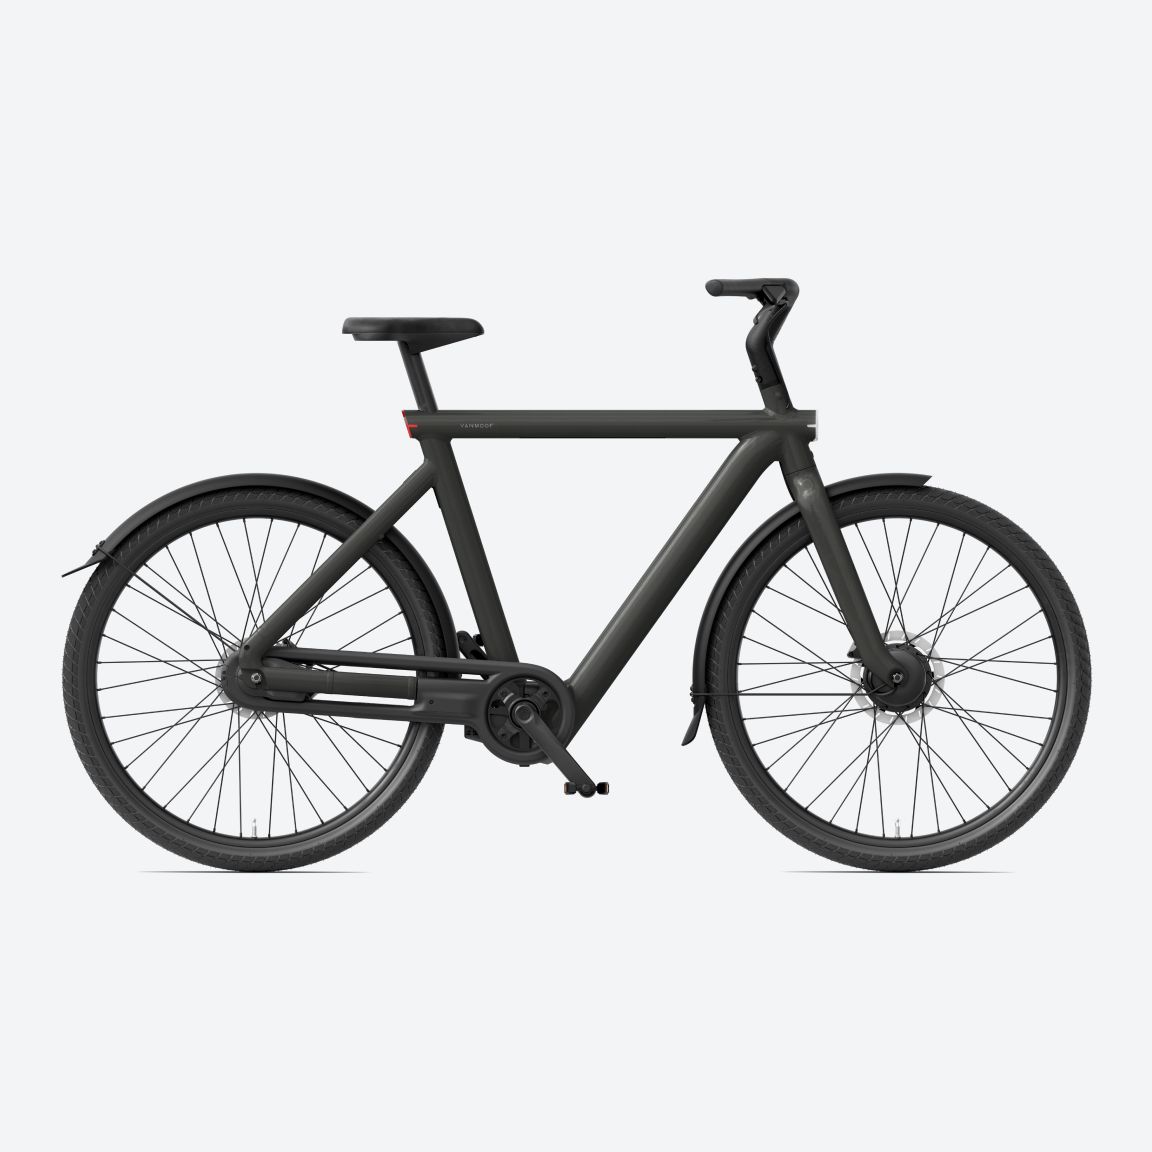 A Vanmoof electric bike sold in Europe only